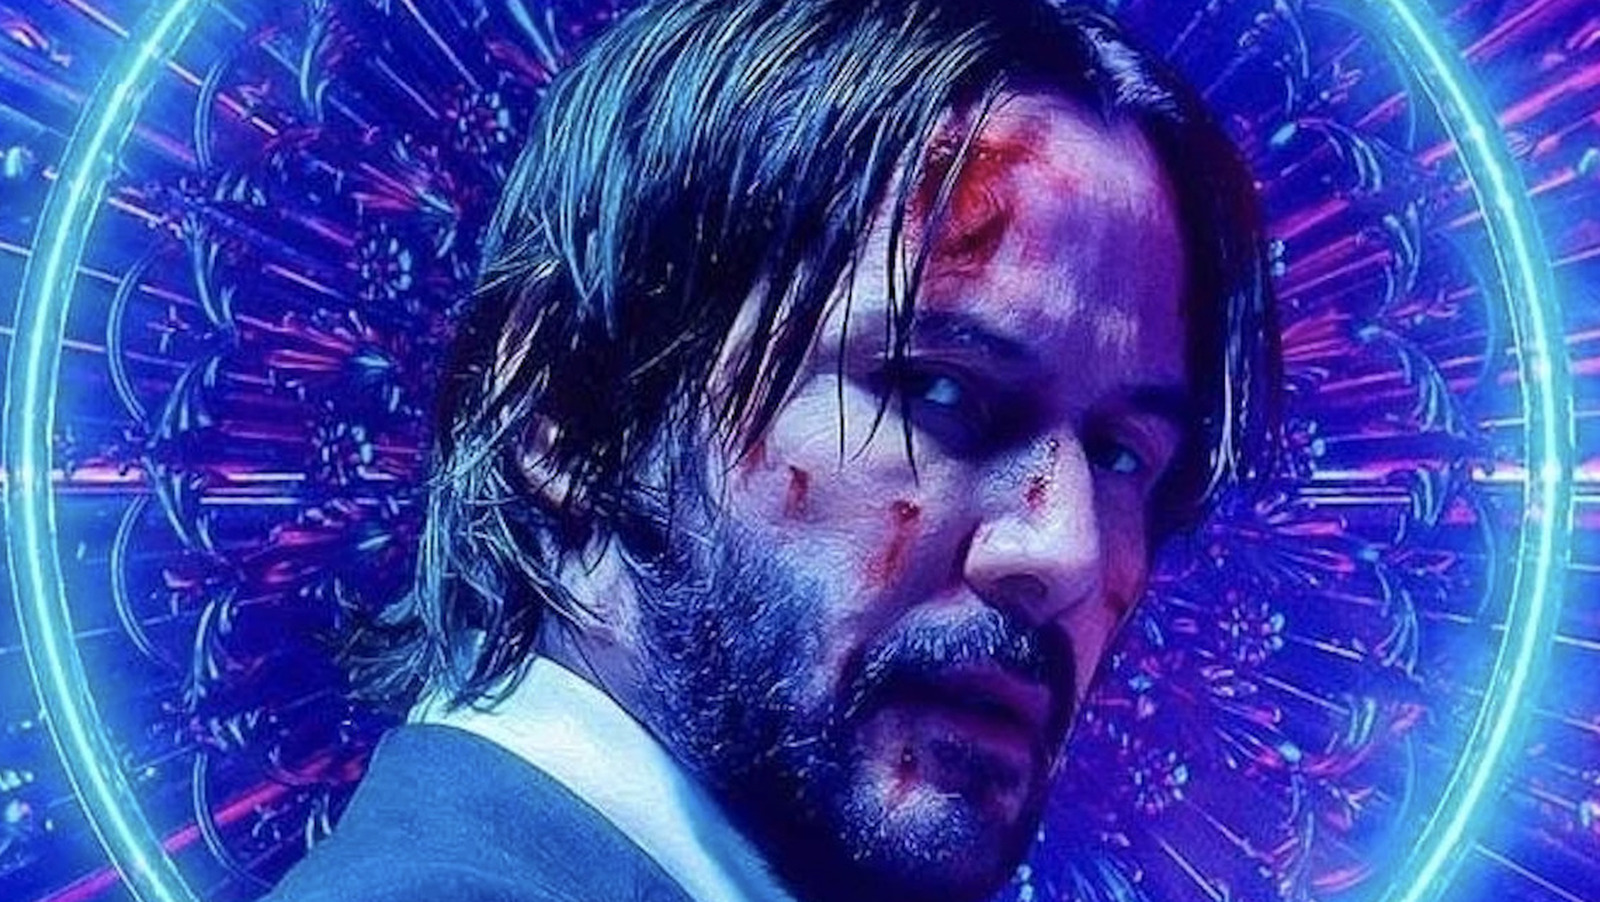 John Wick Ch. 2: The righteous violence we so desperately need right now